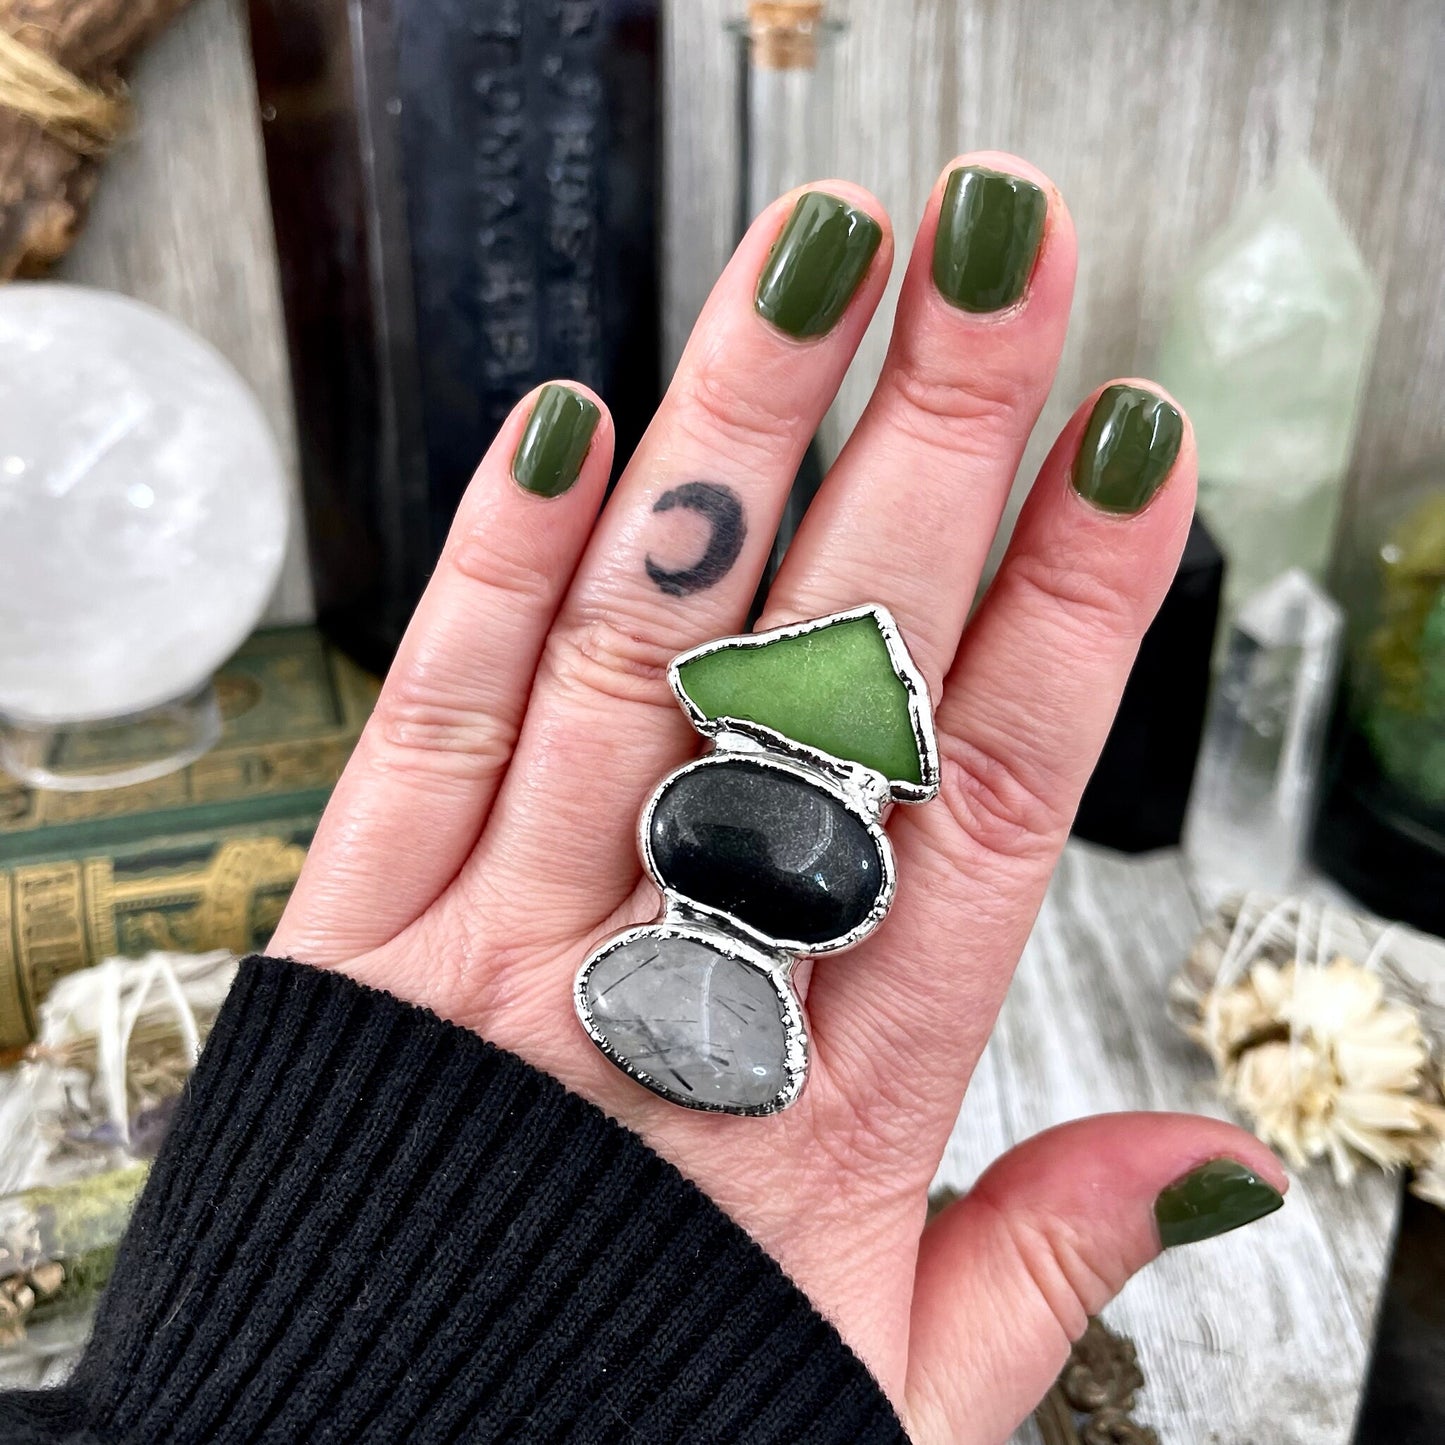 Size 8 Crystal Ring - Three Stone Black Onyx Sea Glass Tourmaline Quartz Ring Sliver / Foxlark Collection - One of a Kind / Crystal Jewelry